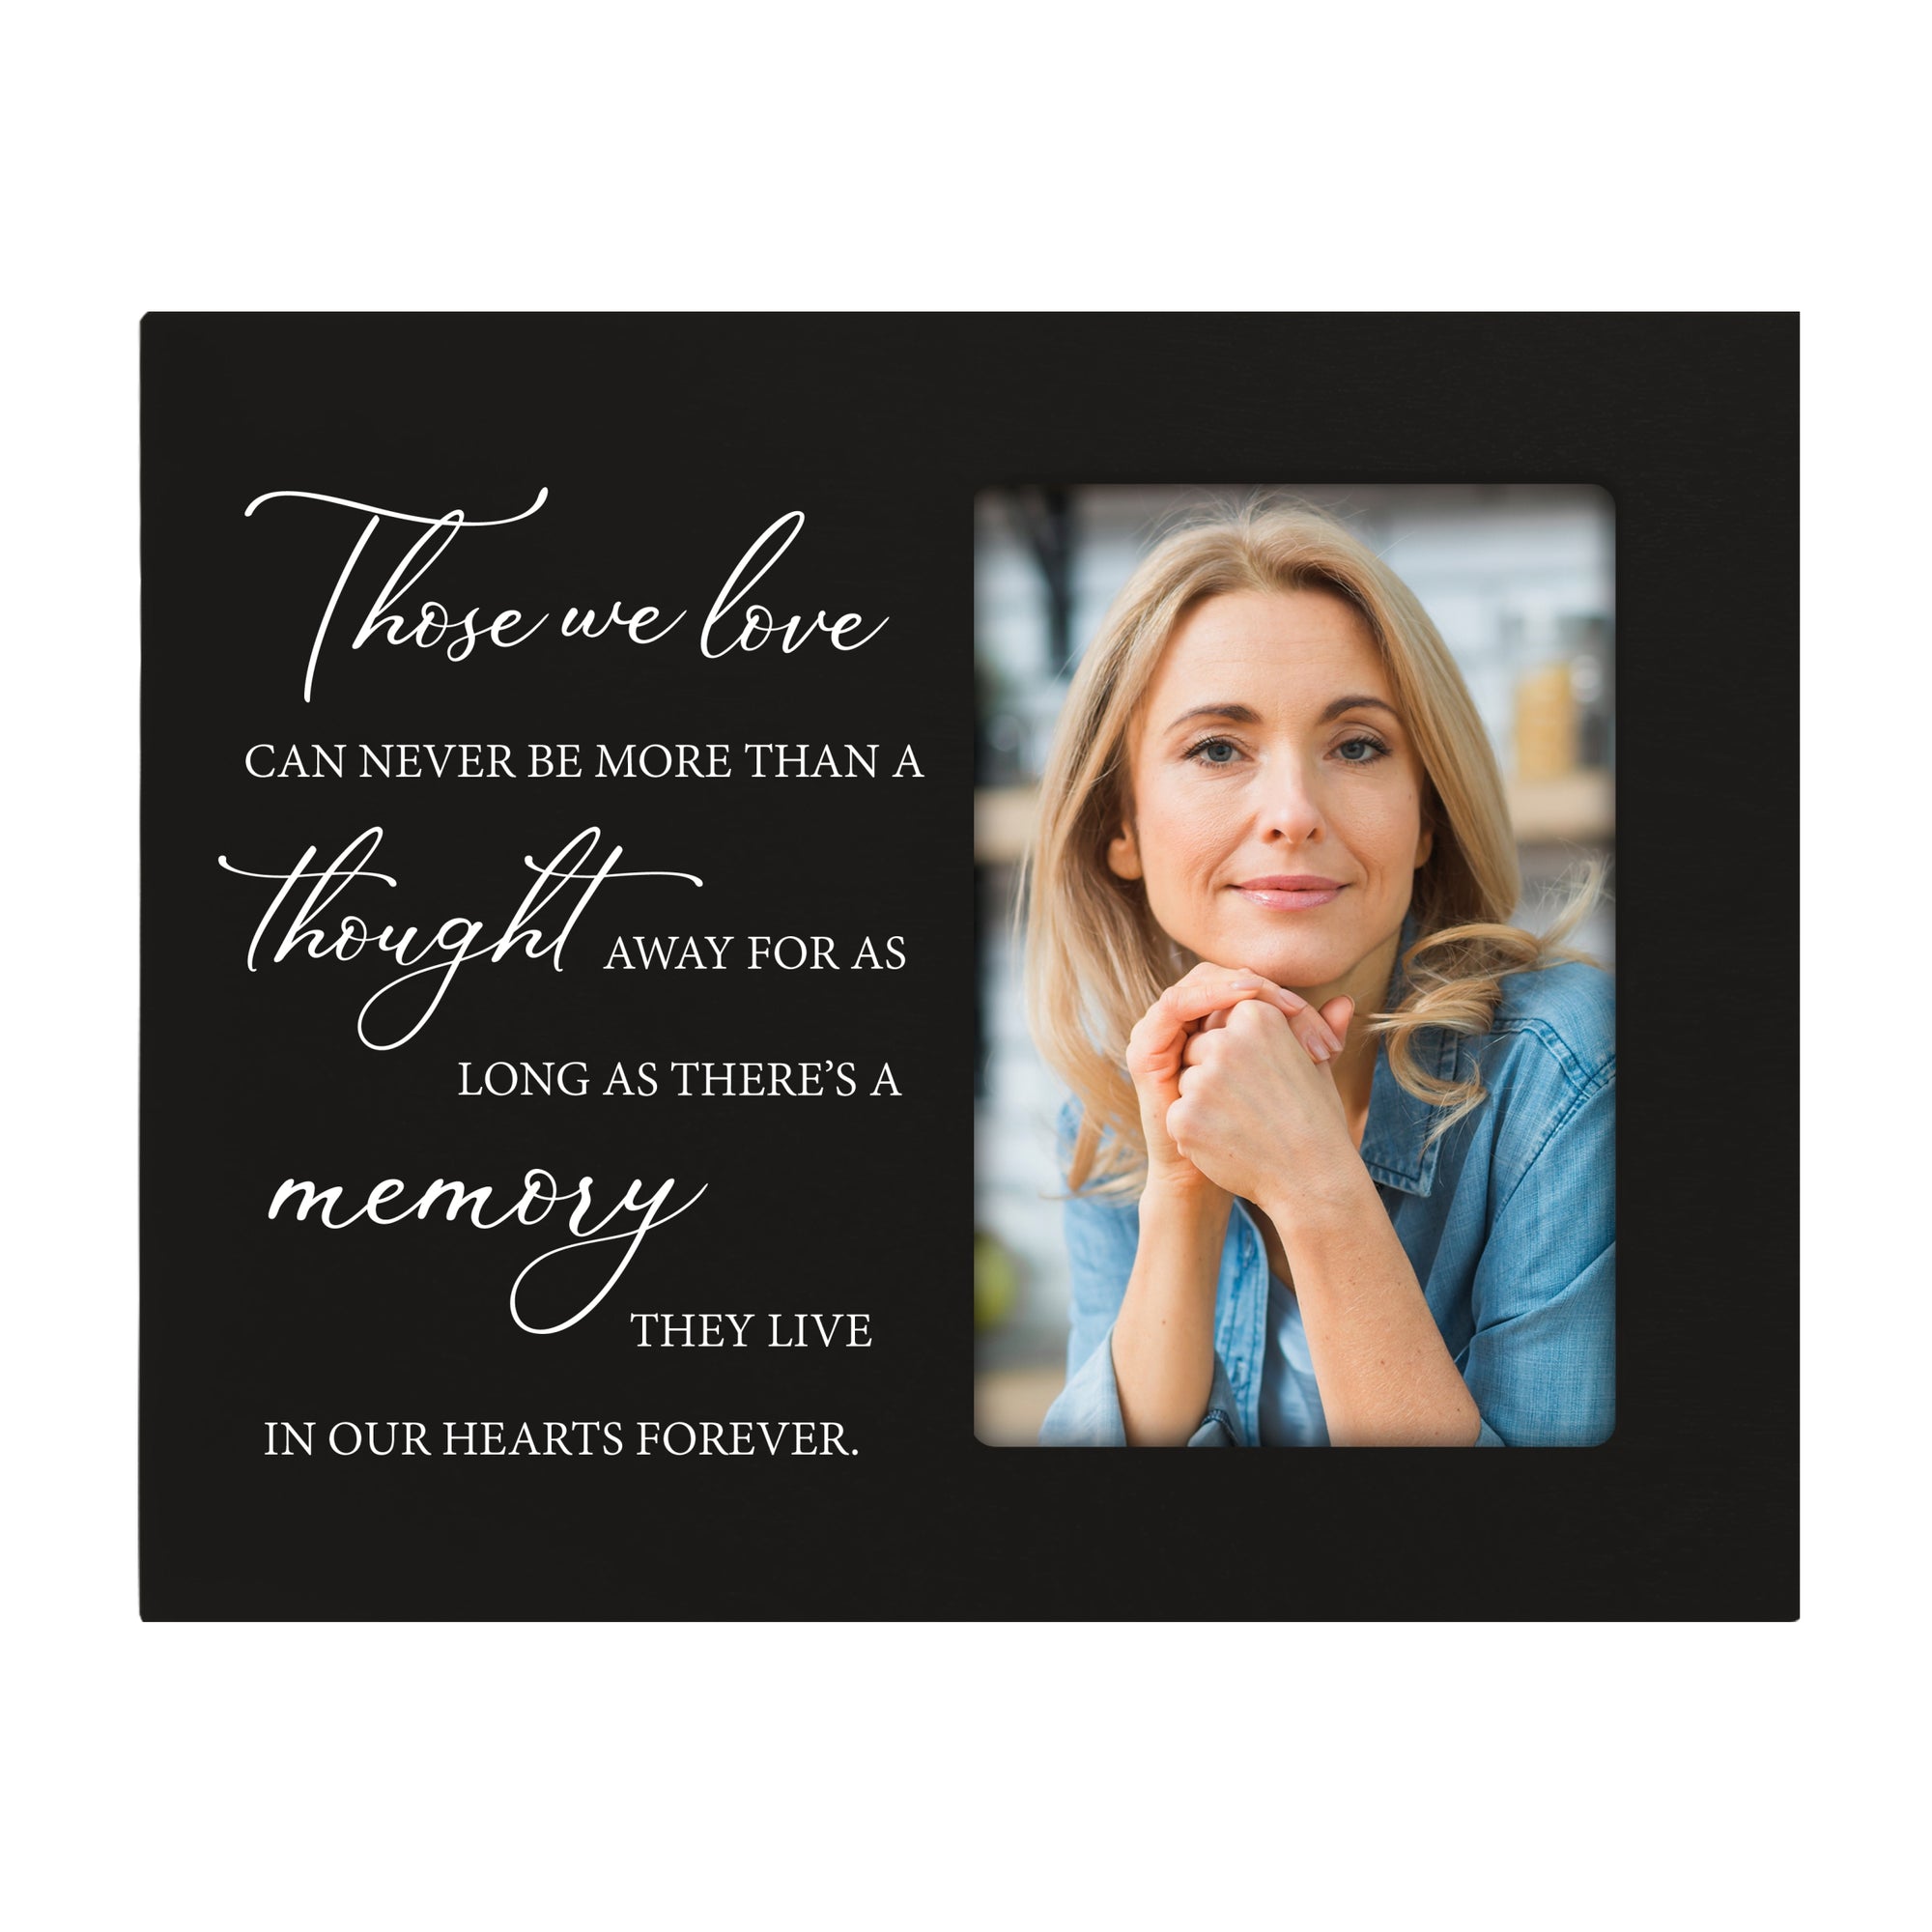 Rustic-Inspired Wooden Human Memorial Frames That Holds A 4x6in Photo - Those We Love (Script)